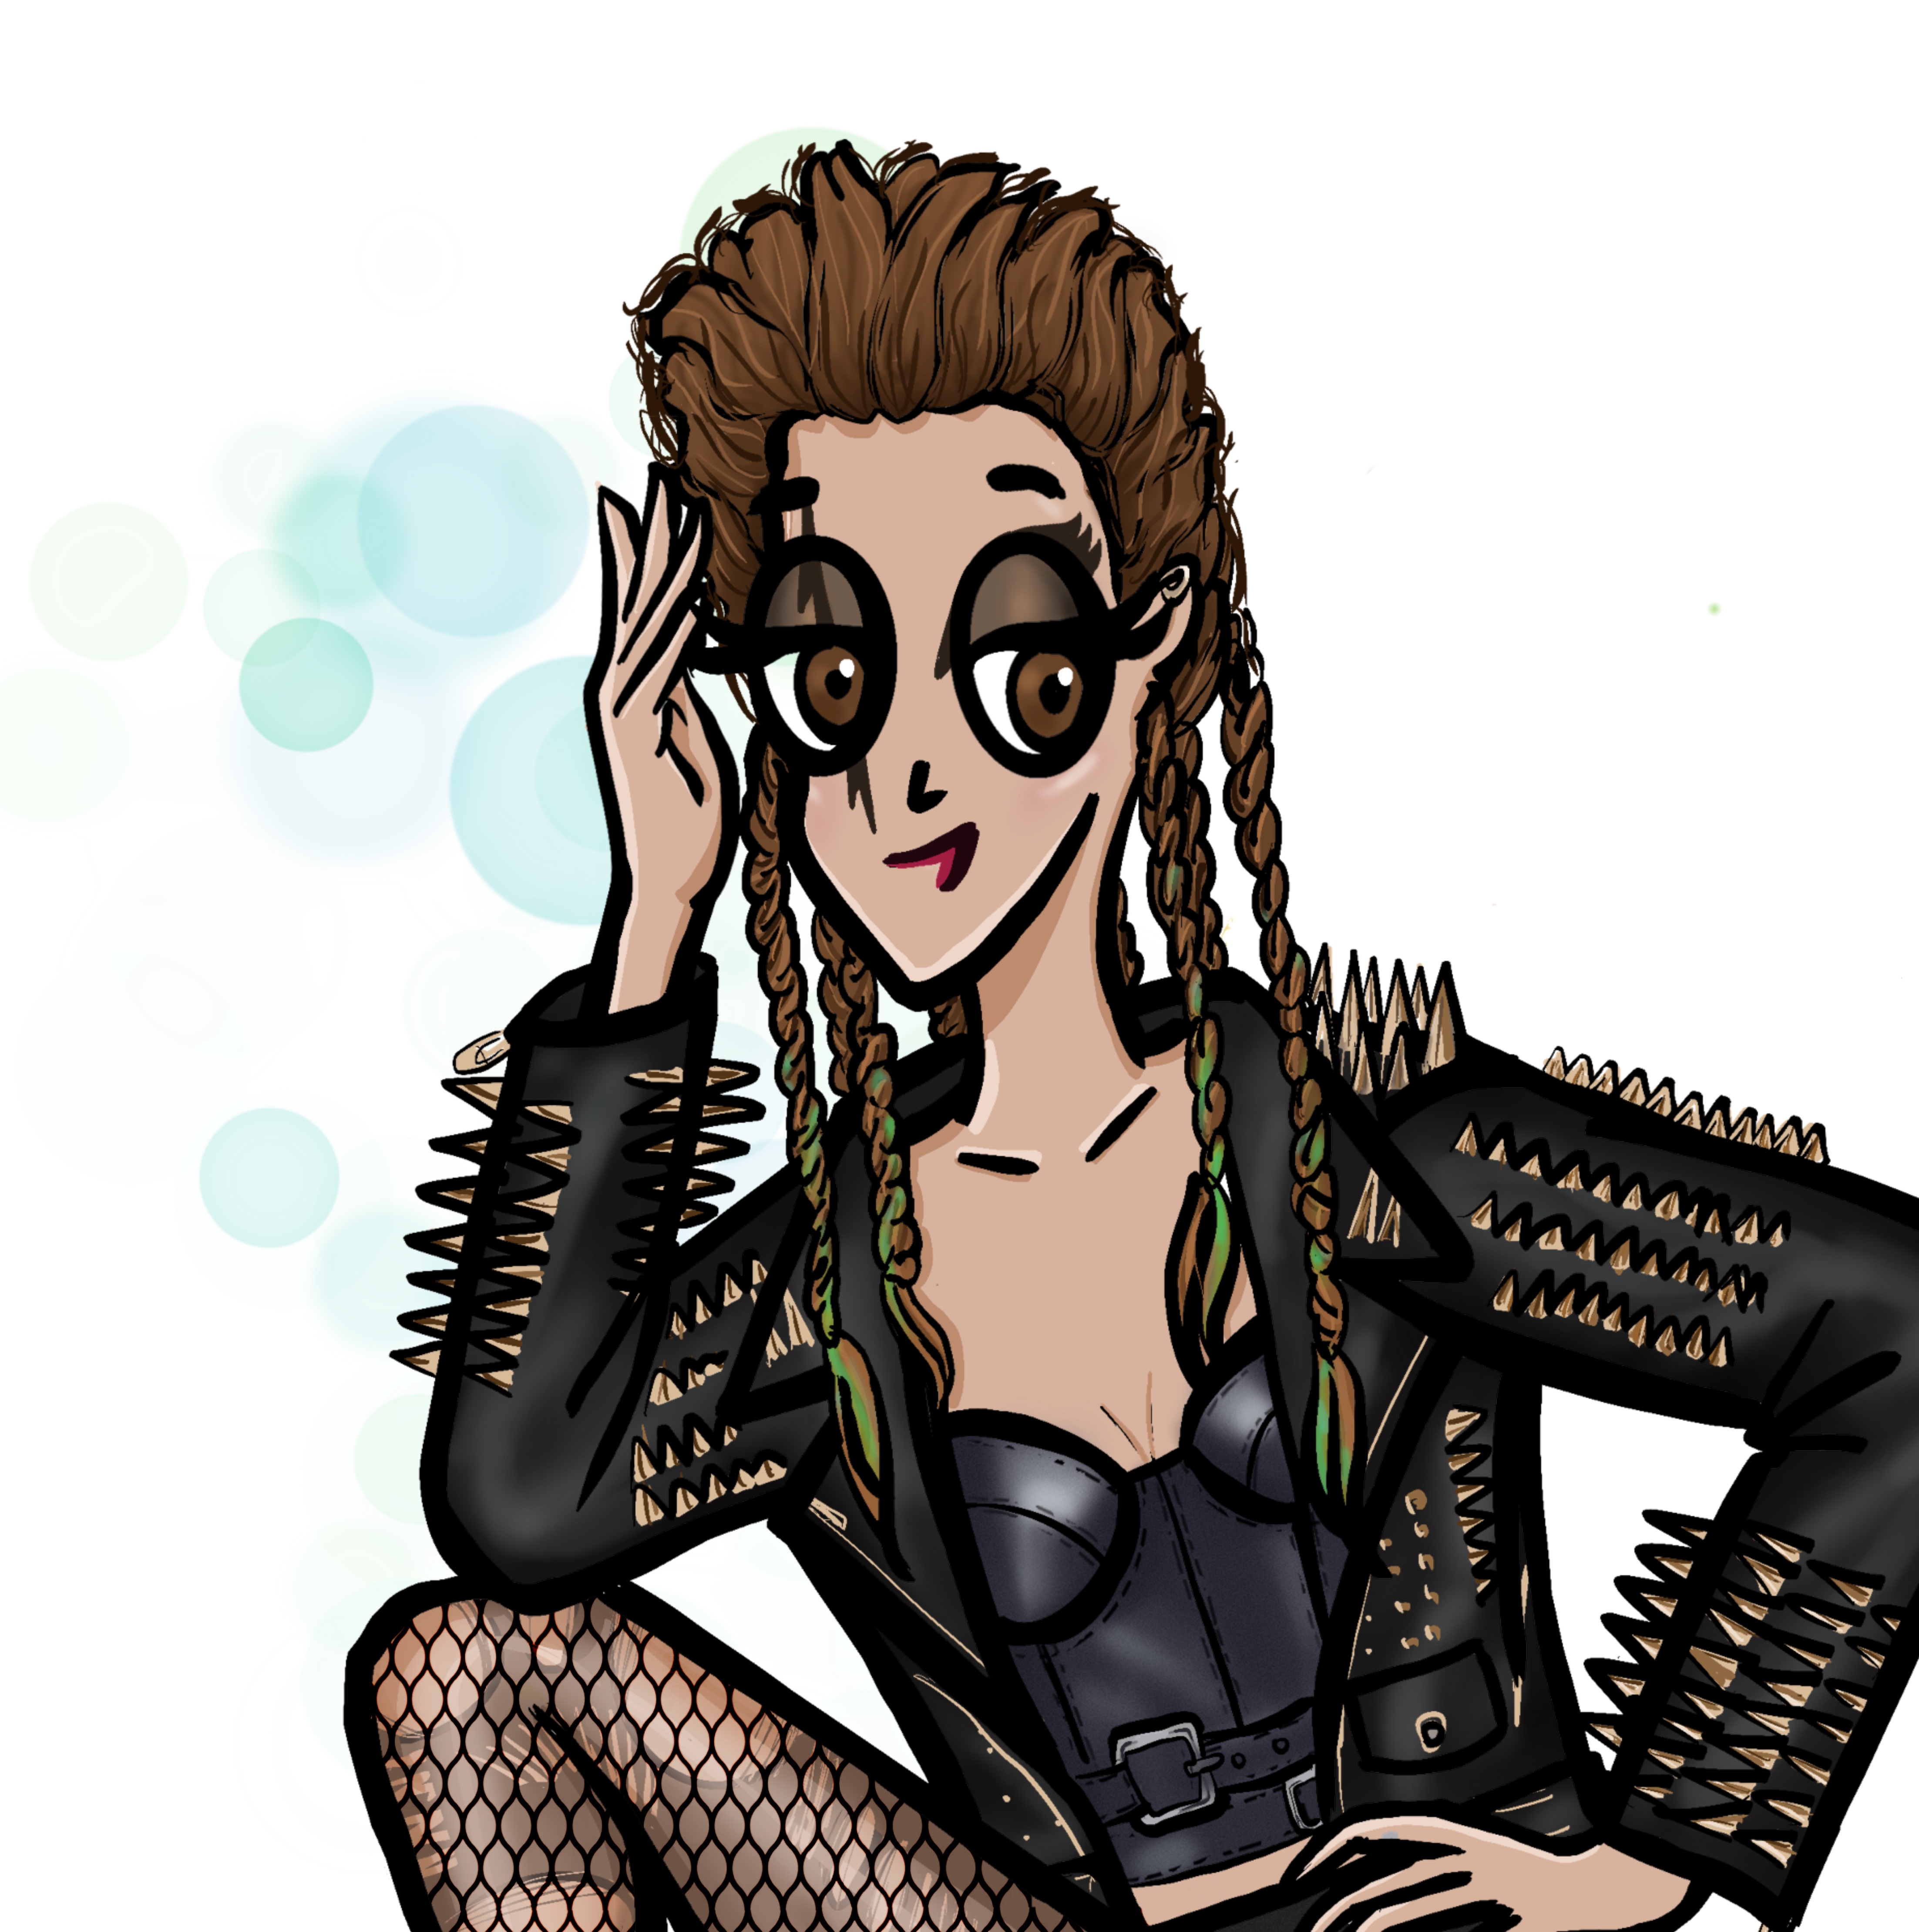 Audrey O. in Punk style